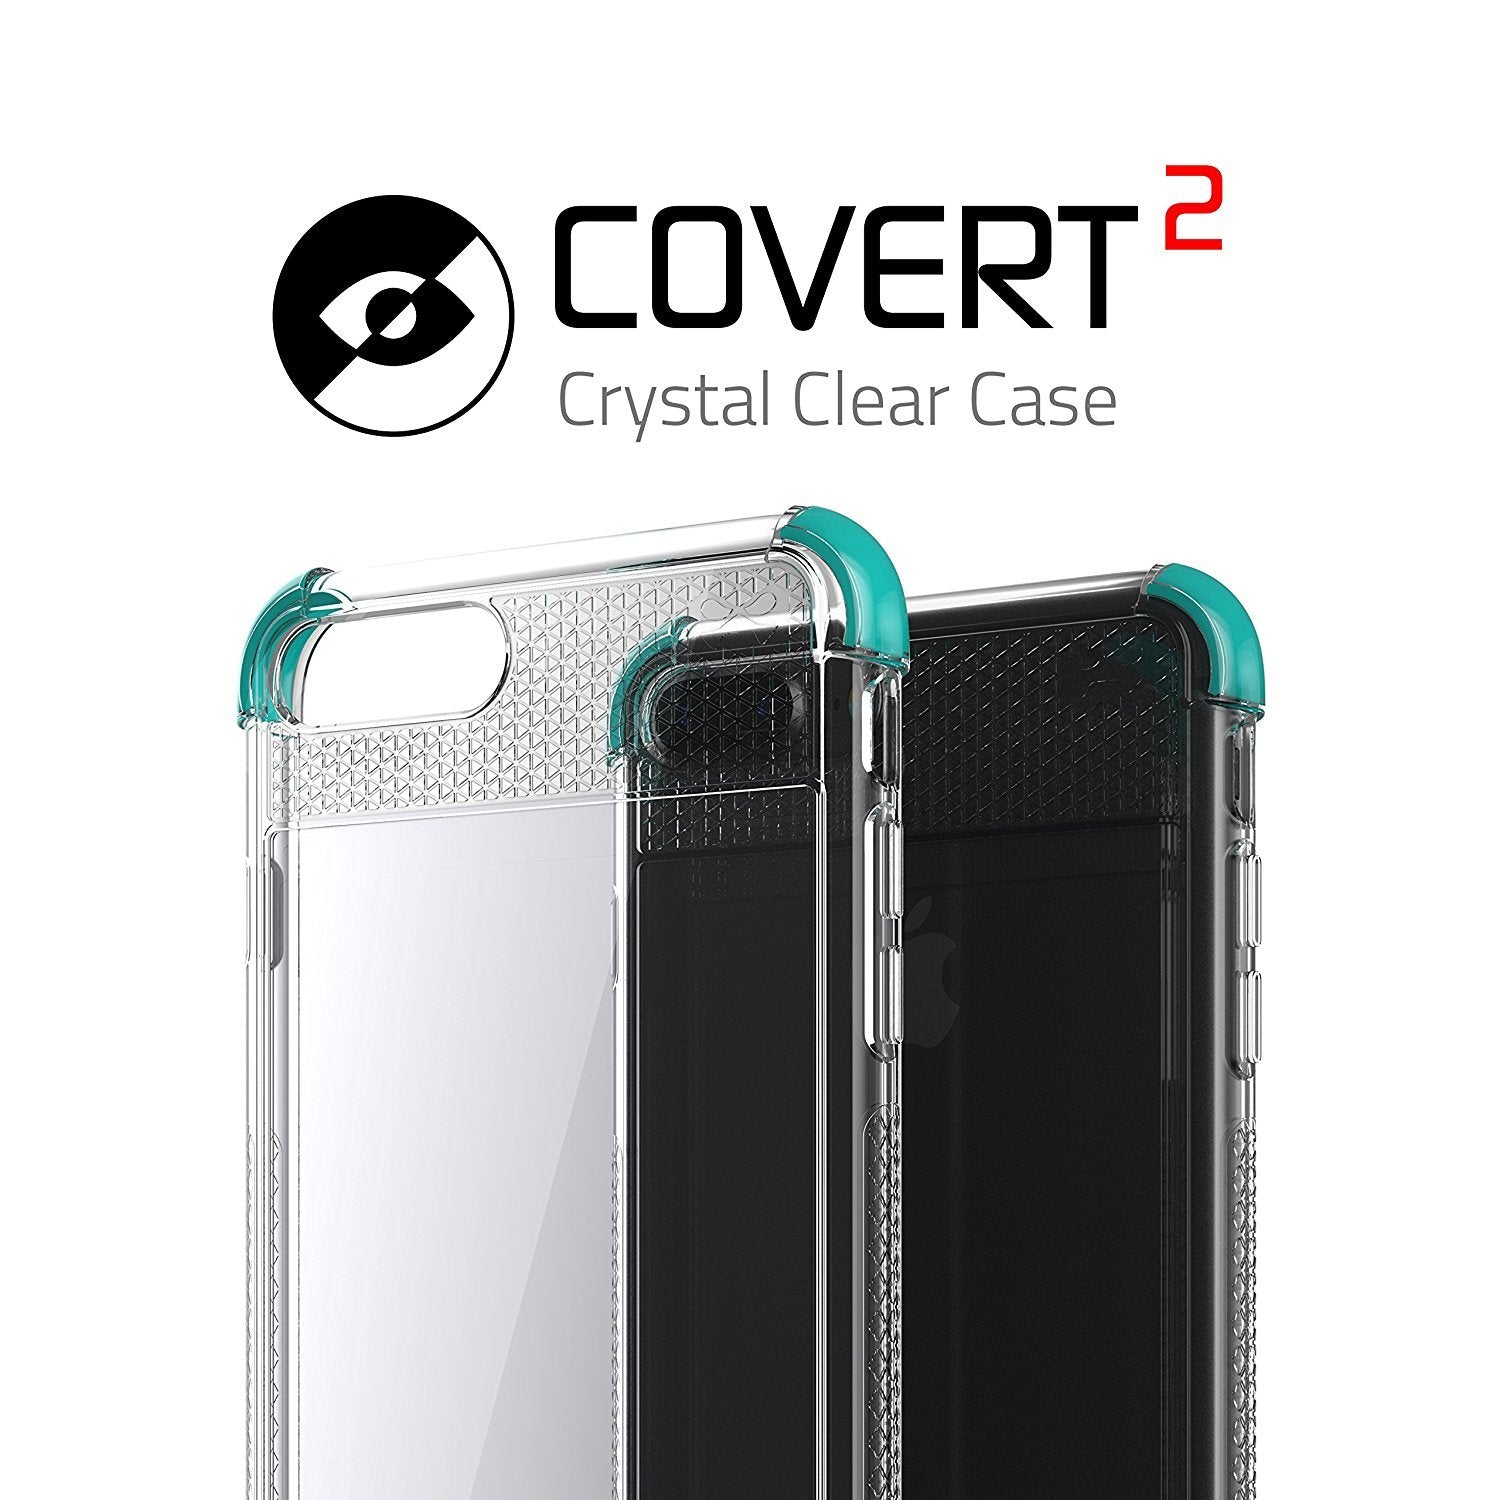 iPhone 7+ Plus Case, Ghostek Covert 2 Series for iPhone 7+ Plus Protective Case [ Teal]